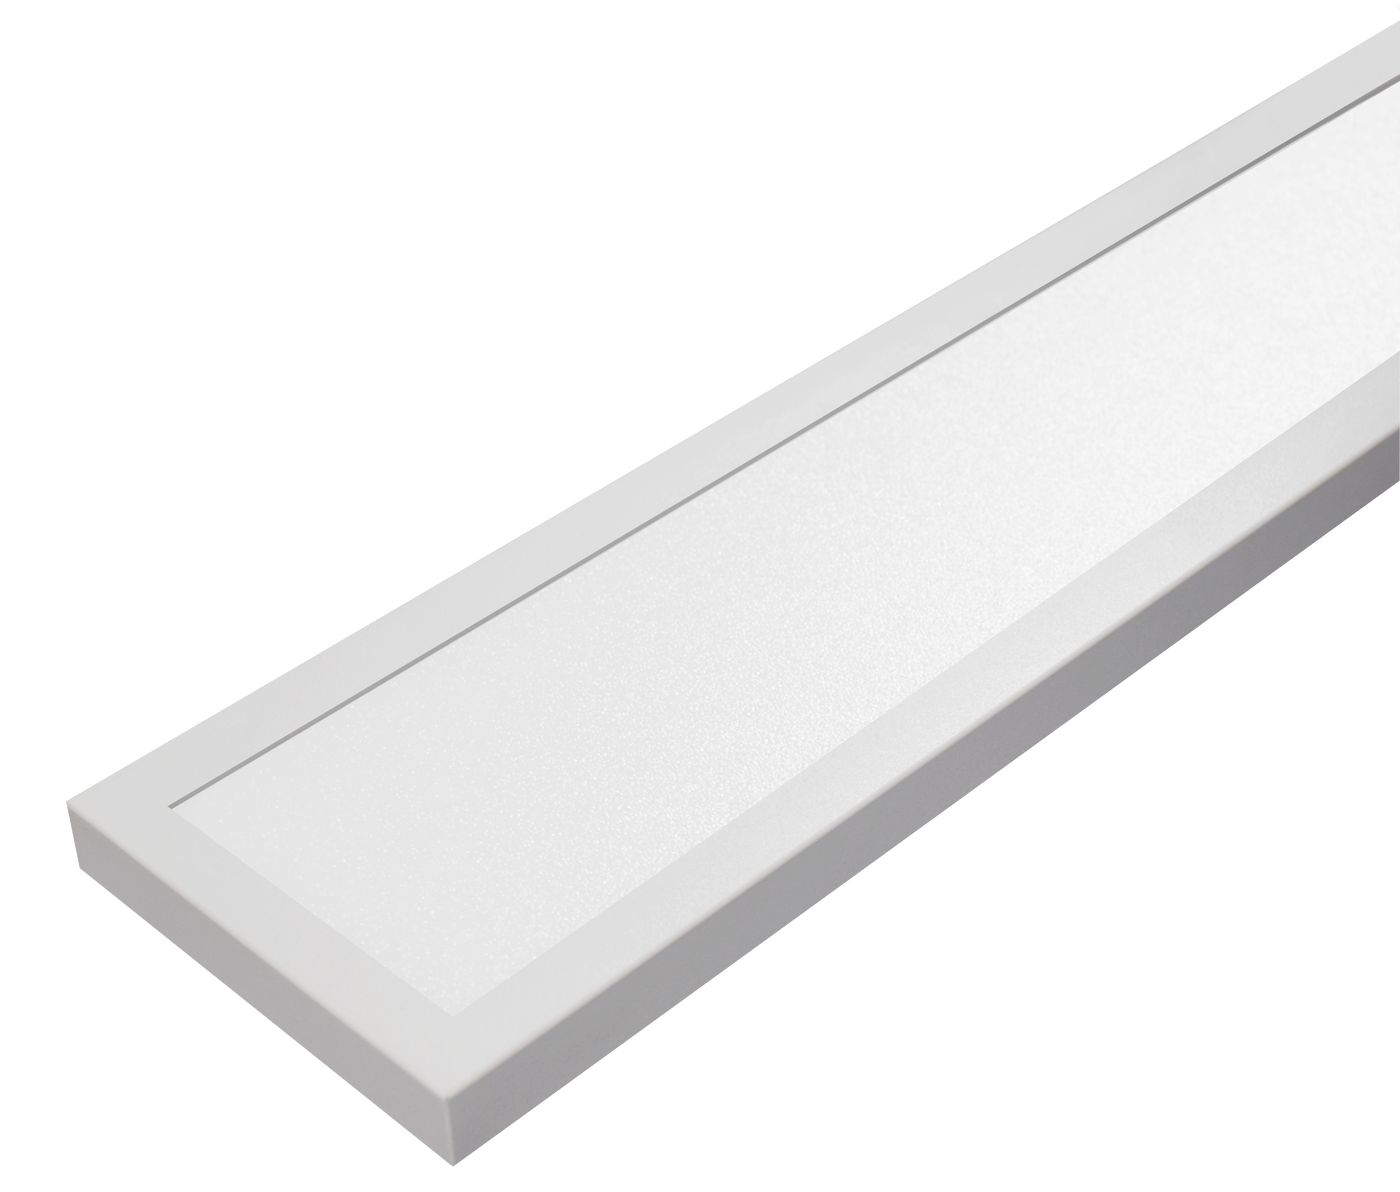 8FT Slim 4" Linear Recessed Light, 3400 Lumen Max, Wattage and CCT Selectable, 110-277V